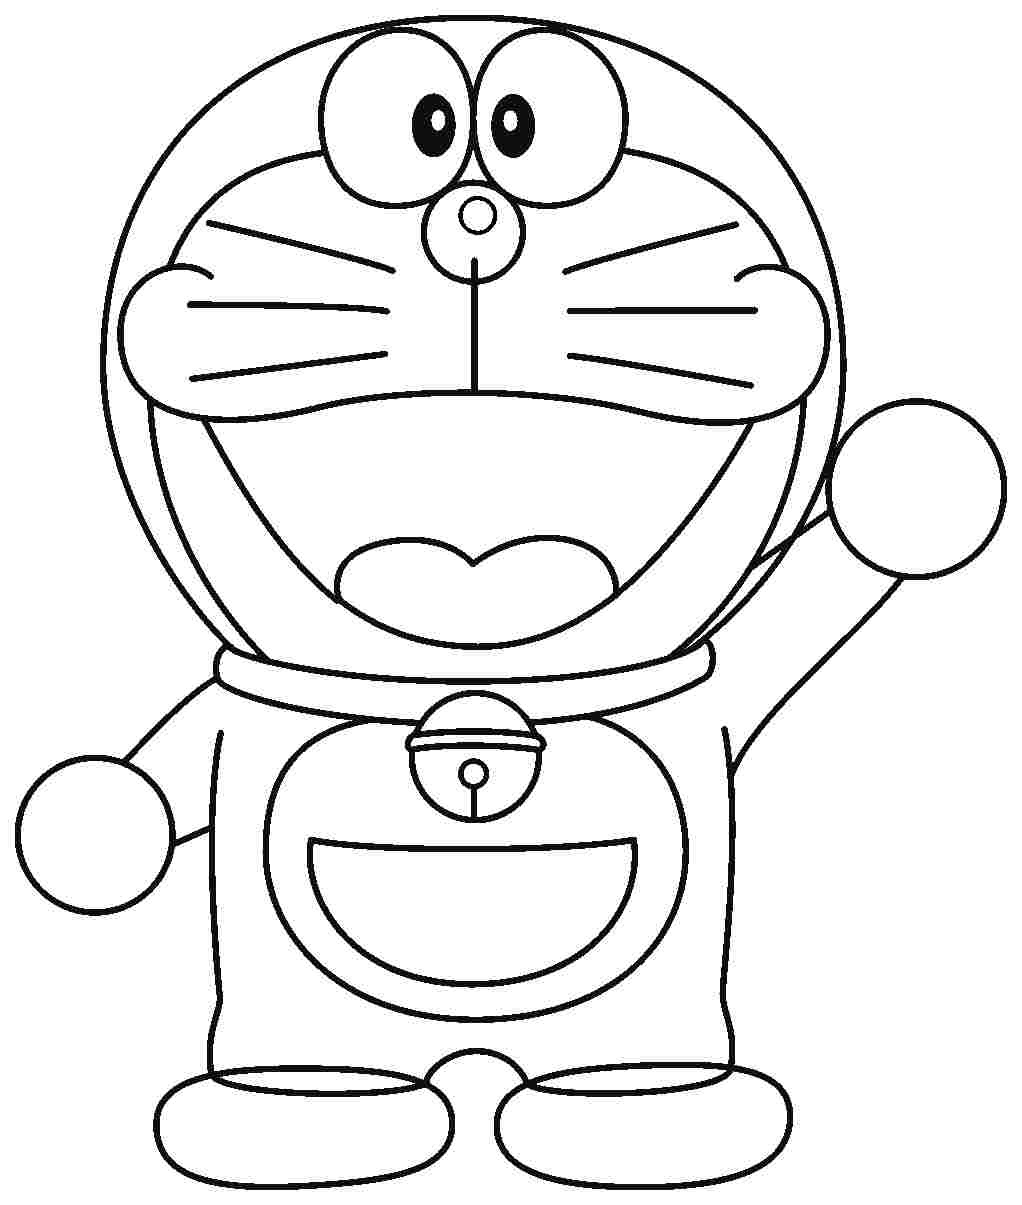 Coloring Book For Kids Doraemon - Drawing with Crayons